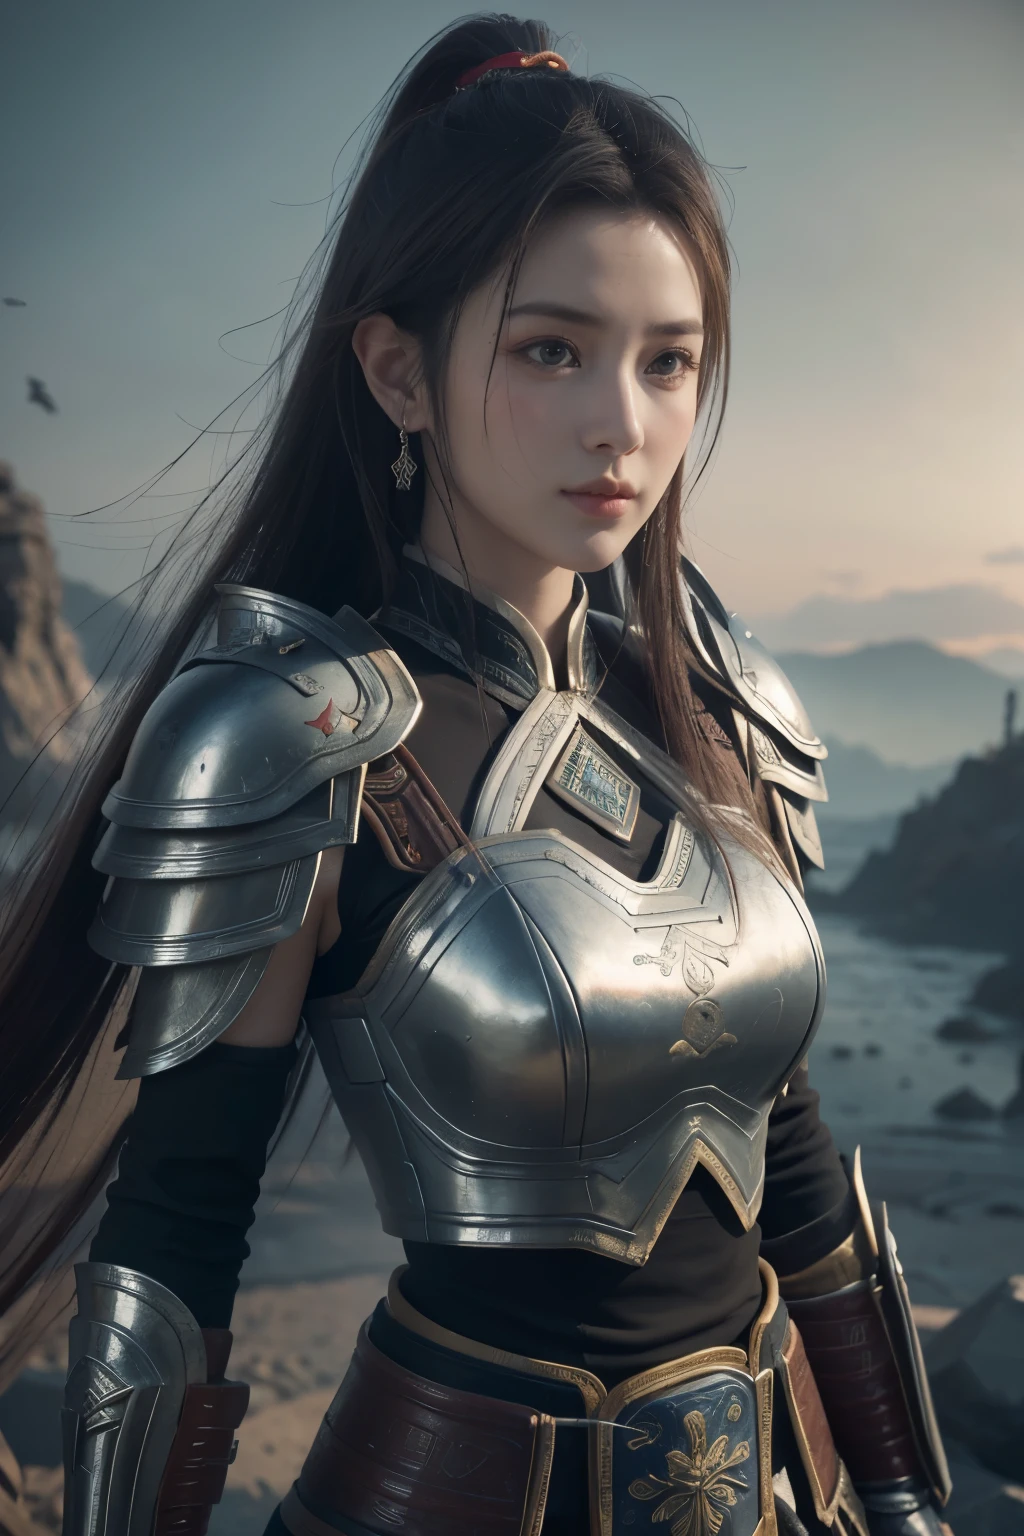 Game art，The best picture quality，Highest resolution，8K，(A bust photograph)，(Portrait)，(Head close-up)，(Rule of thirds)，Unreal Engine 5 rendering works， (The Girl of the Future)，(Female Warrior)， 
15 year old girl，(The generals of ancient China)，An eye rich in detail，(Big breasts)，Elegant and noble，indifferent，brave，
(Wearing ancient Chinese style armor，Armor of Tang Dynasty，Costumes are rich in detail，Metallic luster，Silver gray)，Chinese characters，fantasy style，
photo poses，wild background，Movie lights，Ray tracing，Game CG，((3D Unreal Engine))，OC rendering reflection pattern